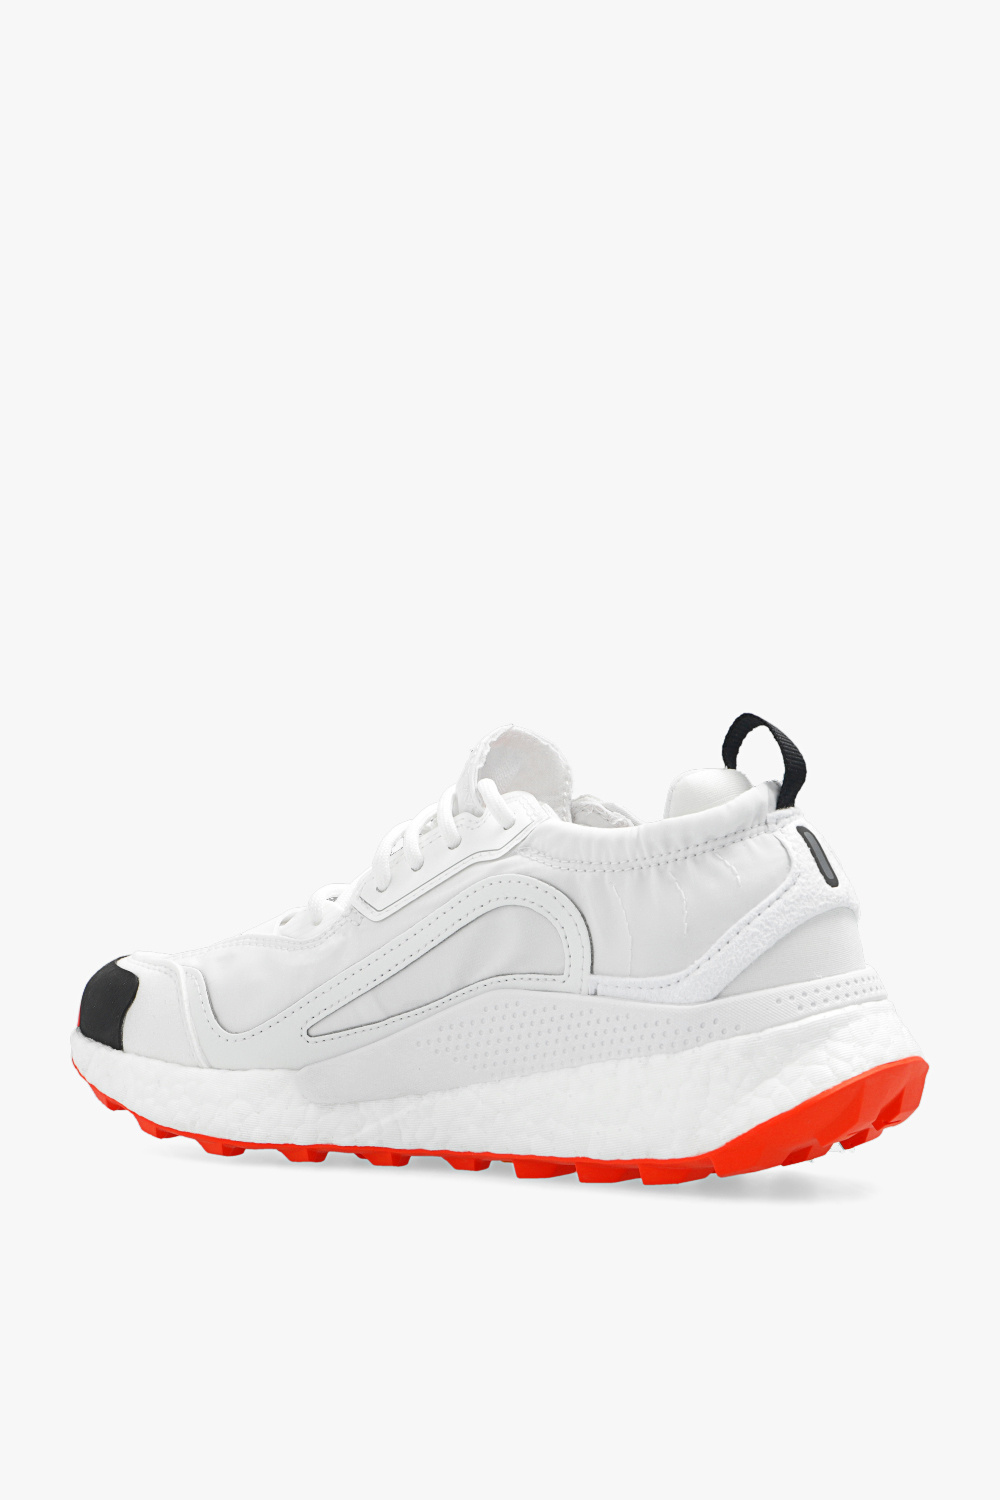 adidas illinois by Stella McCartney ‘Outdoor Boost 2.0 Light’ running shoes